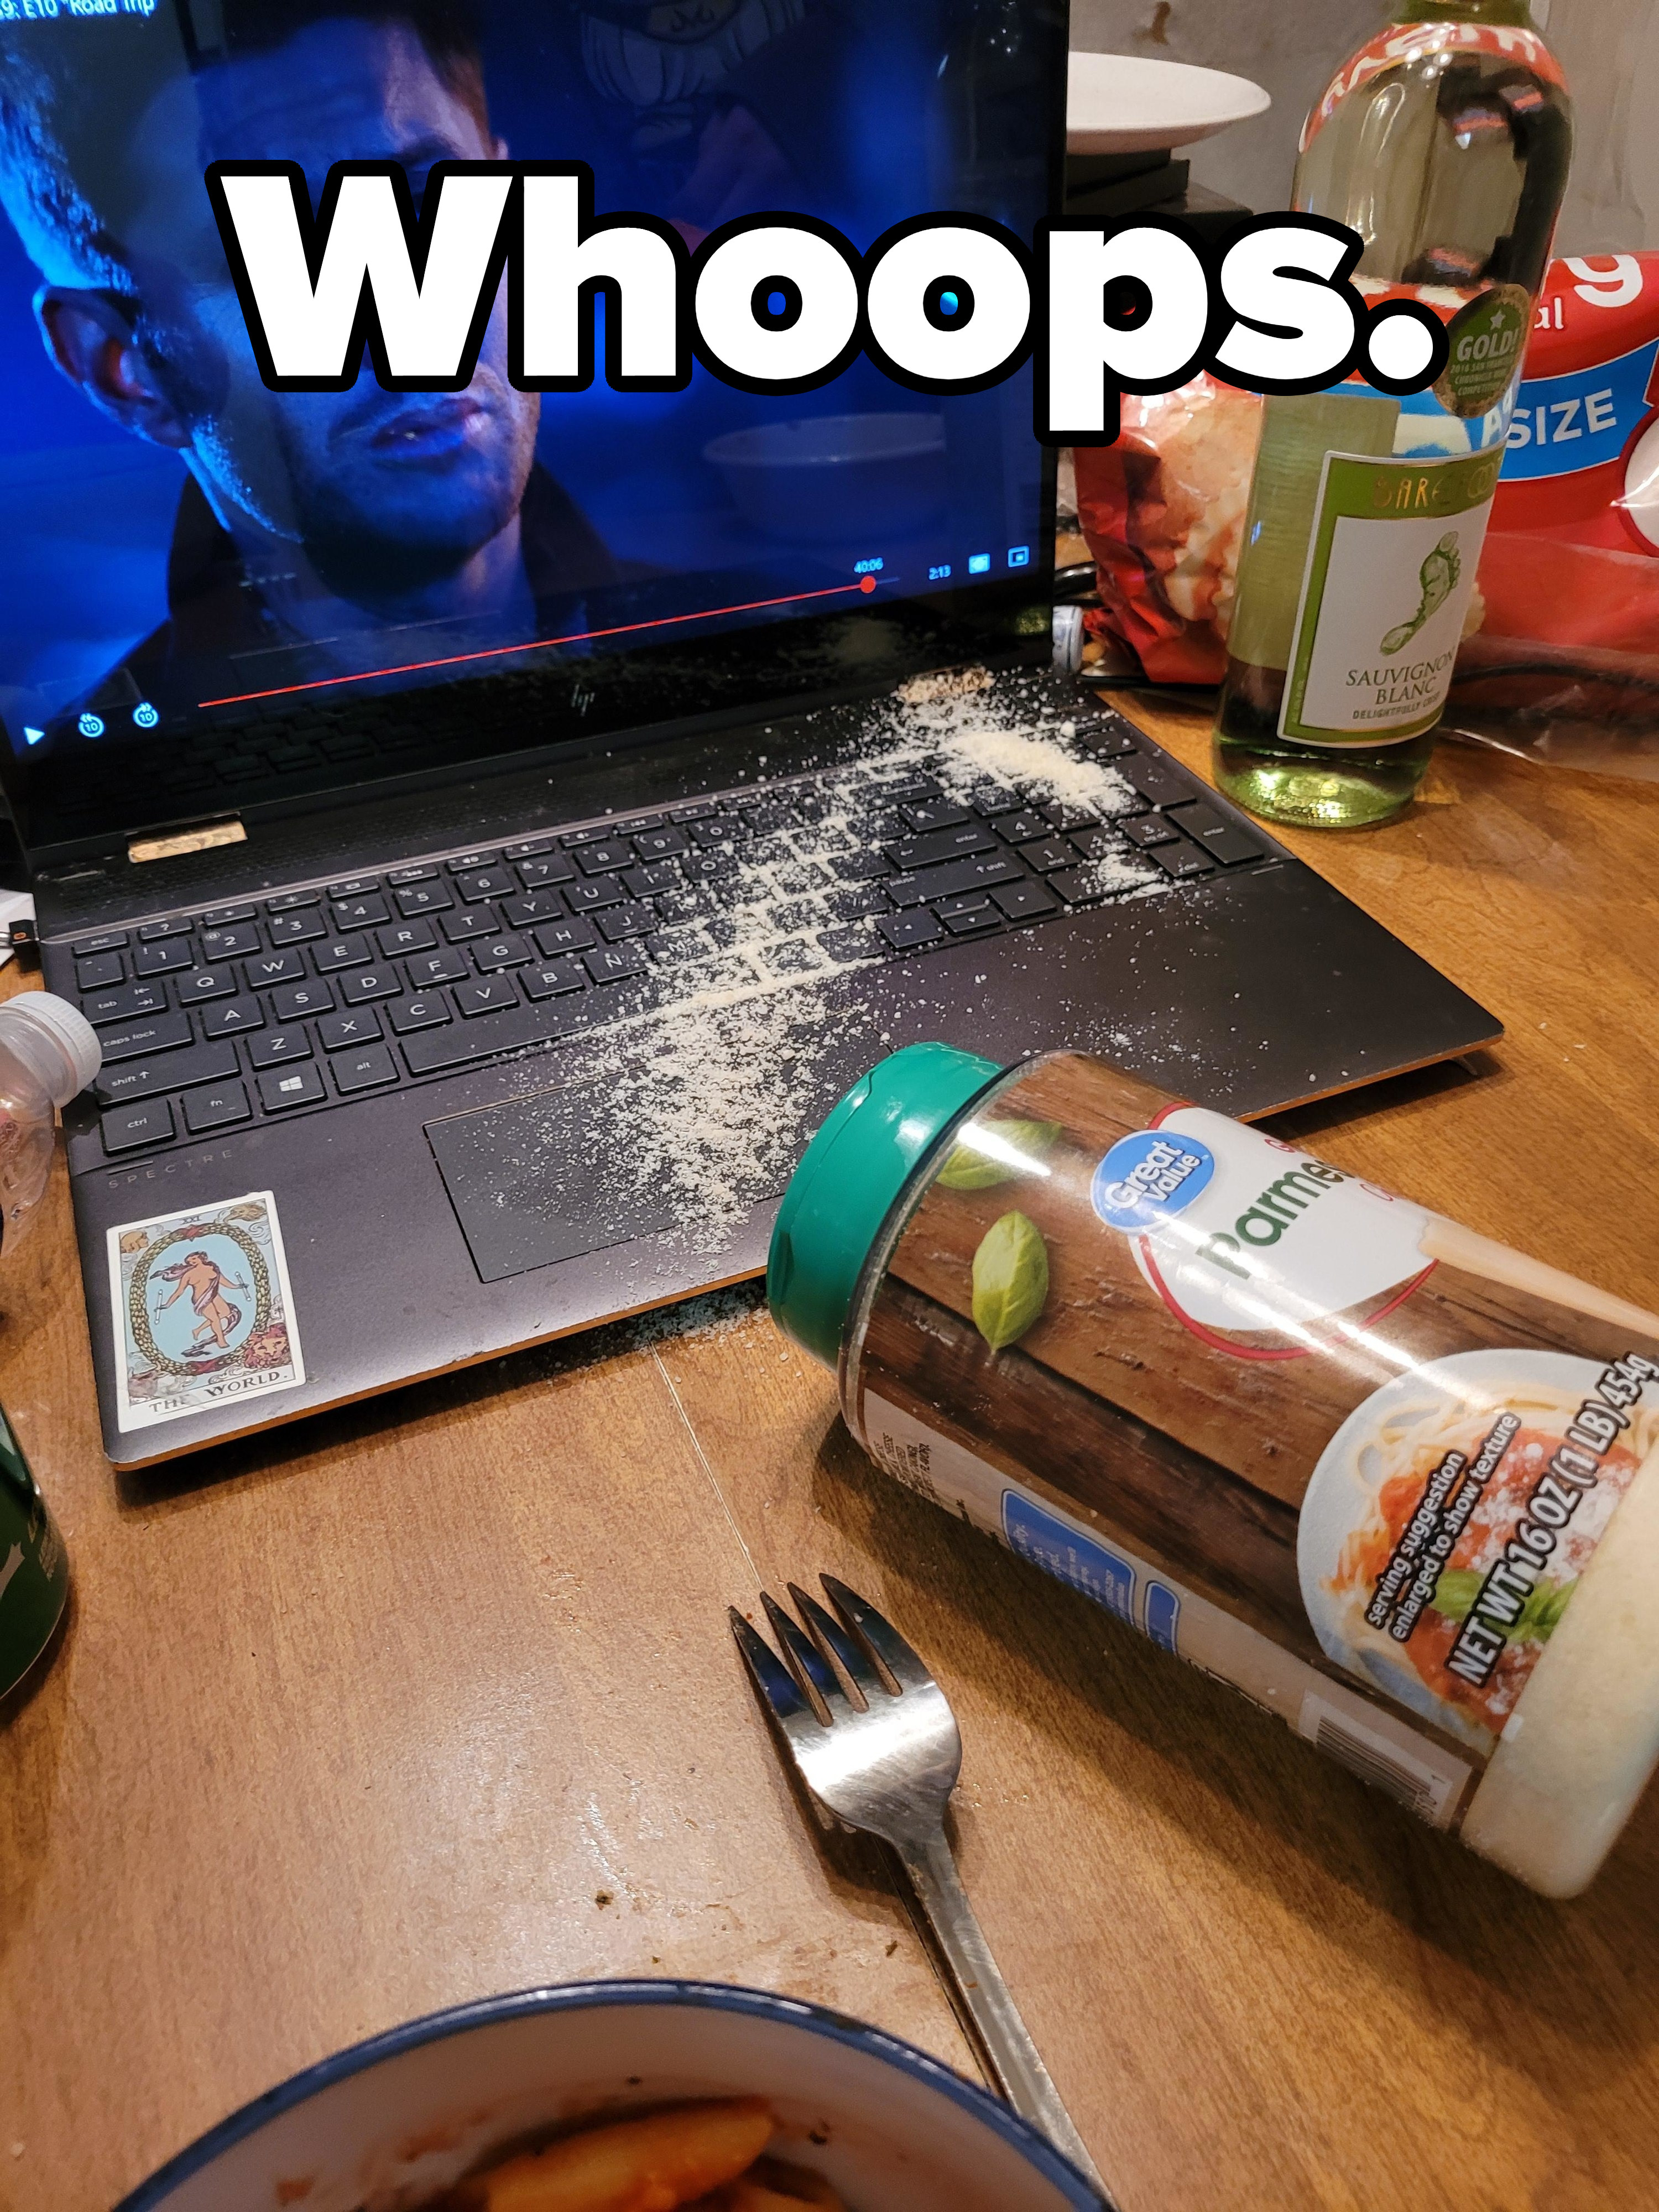 Parmesan cheese spilled on a laptop